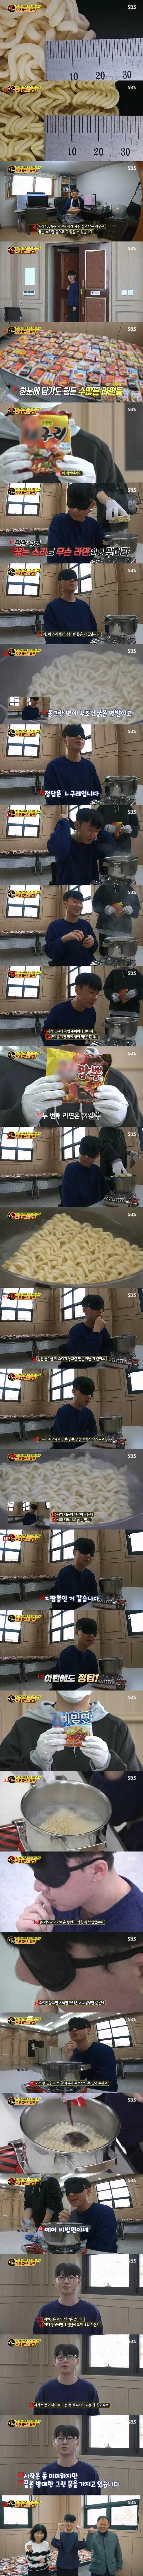 The master of cooking ramen who won the 2023 Ramen Cooking Contest